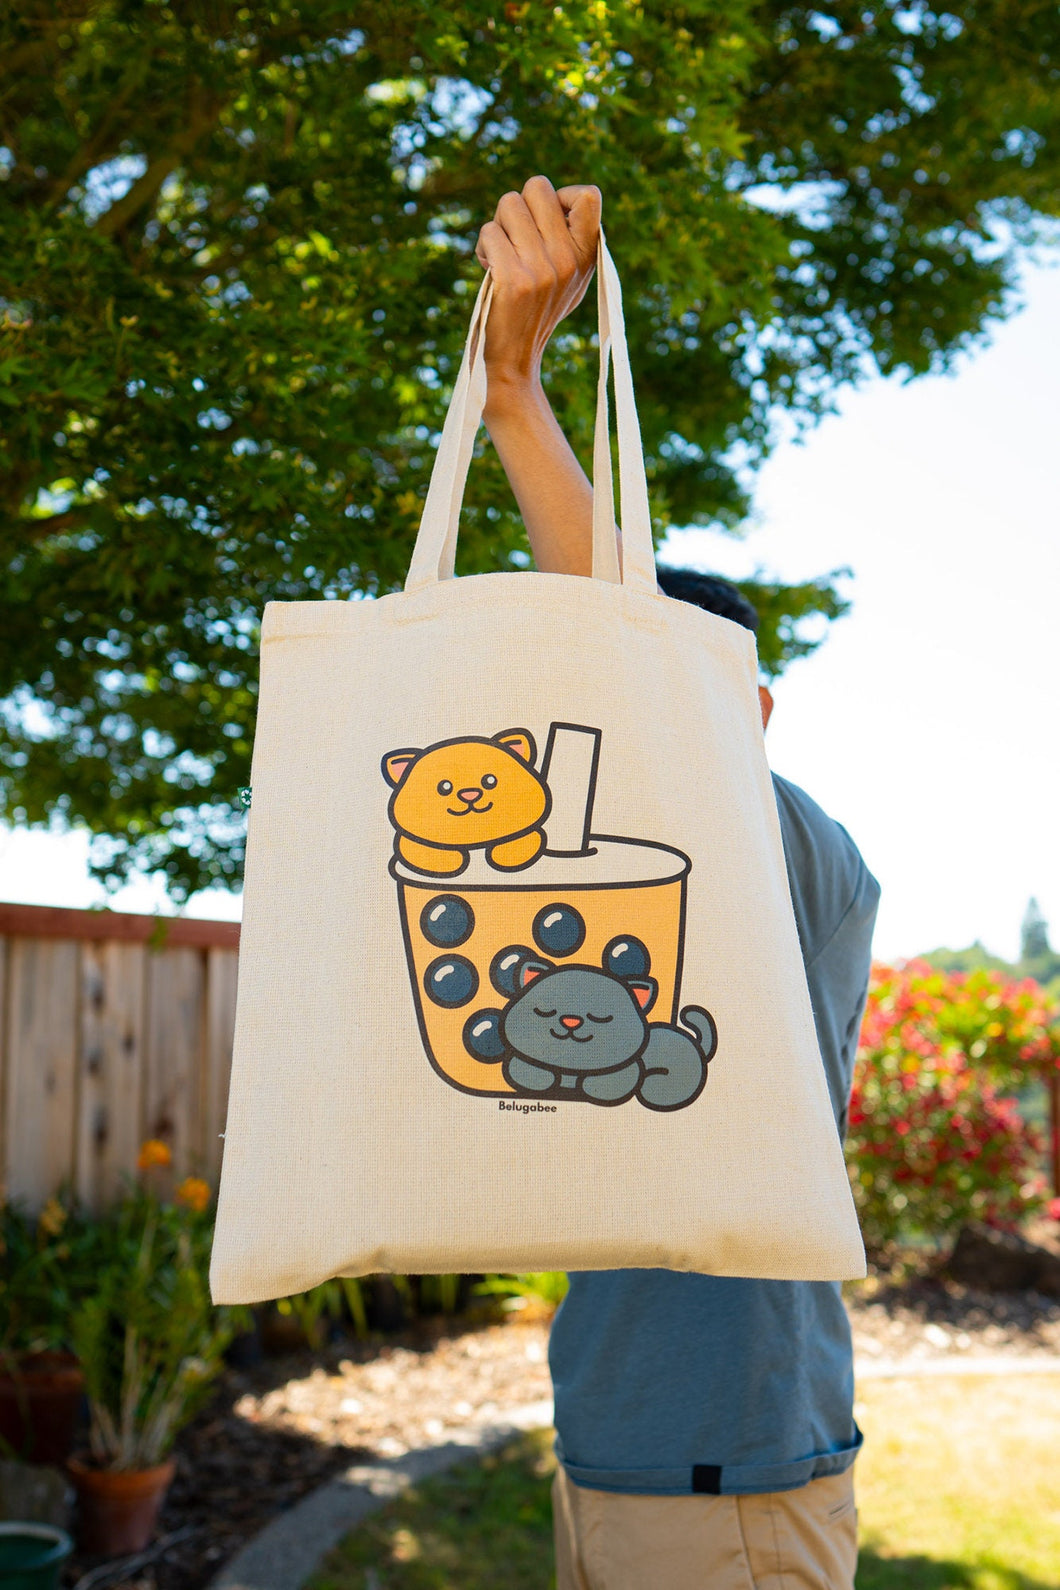 Kittens Boba Tote Bag being carried by a stylish individual, showcasing the cute feline design and adding a touch of whimsy to your daily outings. 🐱👜 #KittensBoba #ToteBagStyle #BambooArtistry